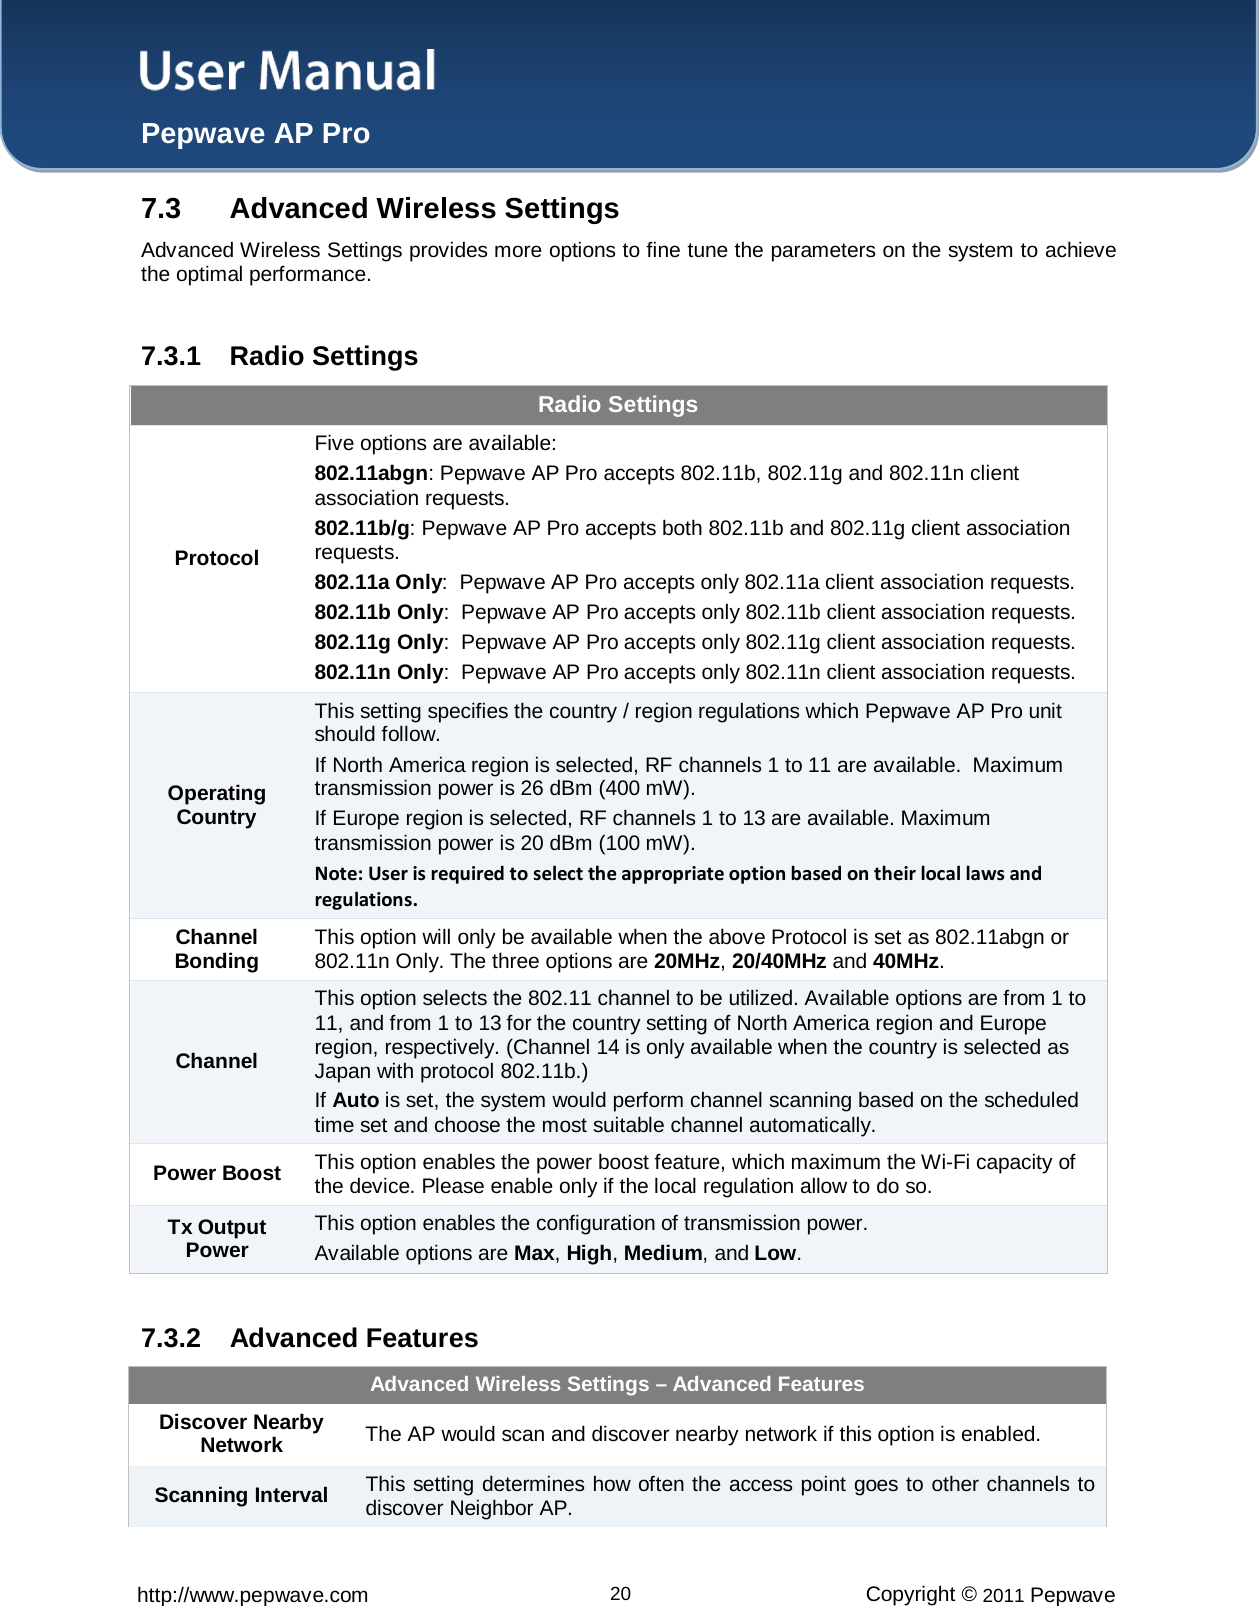 User Manual  Pepwave AP Pro http://www.pepwave.com 20 Copyright © 2011 Pepwave  7.3 Advanced Wireless Settings Advanced Wireless Settings provides more options to fine tune the parameters on the system to achieve the optimal performance.  7.3.1  Radio Settings Radio Settings Protocol Five options are available: 802.11abgn: Pepwave AP Pro accepts 802.11b, 802.11g and 802.11n client association requests. 802.11b/g: Pepwave AP Pro accepts both 802.11b and 802.11g client association requests. 802.11a Only:  Pepwave AP Pro accepts only 802.11a client association requests. 802.11b Only:  Pepwave AP Pro accepts only 802.11b client association requests. 802.11g Only:  Pepwave AP Pro accepts only 802.11g client association requests. 802.11n Only:  Pepwave AP Pro accepts only 802.11n client association requests. Operating Country This setting specifies the country / region regulations which Pepwave AP Pro unit should follow.   If North America region is selected, RF channels 1 to 11 are available.  Maximum transmission power is 26 dBm (400 mW).   If Europe region is selected, RF channels 1 to 13 are available. Maximum transmission power is 20 dBm (100 mW). Note: User is required to select the appropriate option based on their local laws and regulations. Channel Bonding This option will only be available when the above Protocol is set as 802.11abgn or 802.11n Only. The three options are 20MHz, 20/40MHz and 40MHz. Channel This option selects the 802.11 channel to be utilized. Available options are from 1 to 11, and from 1 to 13 for the country setting of North America region and Europe region, respectively. (Channel 14 is only available when the country is selected as Japan with protocol 802.11b.) If Auto is set, the system would perform channel scanning based on the scheduled time set and choose the most suitable channel automatically. Power Boost This option enables the power boost feature, which maximum the Wi-Fi capacity of the device. Please enable only if the local regulation allow to do so. Tx Output Power This option enables the configuration of transmission power. Available options are Max, High, Medium, and Low.  7.3.2 Advanced Features Advanced Wireless Settings – Advanced Features Discover Nearby Network The AP would scan and discover nearby network if this option is enabled. Scanning Interval This setting determines how often the access point goes to other channels to discover Neighbor AP. 